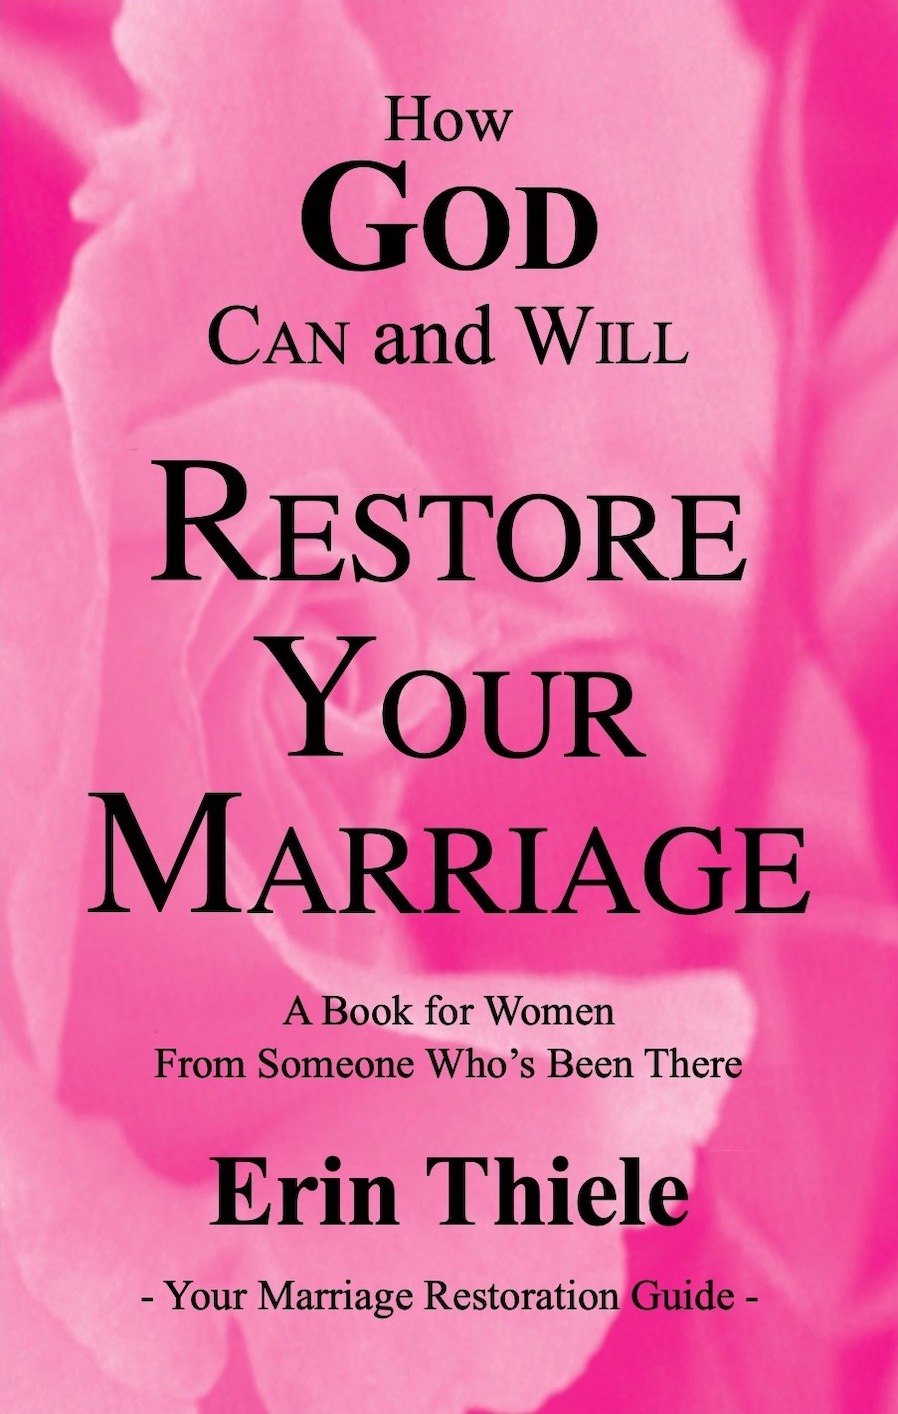 How God Can and Will Restore Your Marriage: From Someone Who's Been There